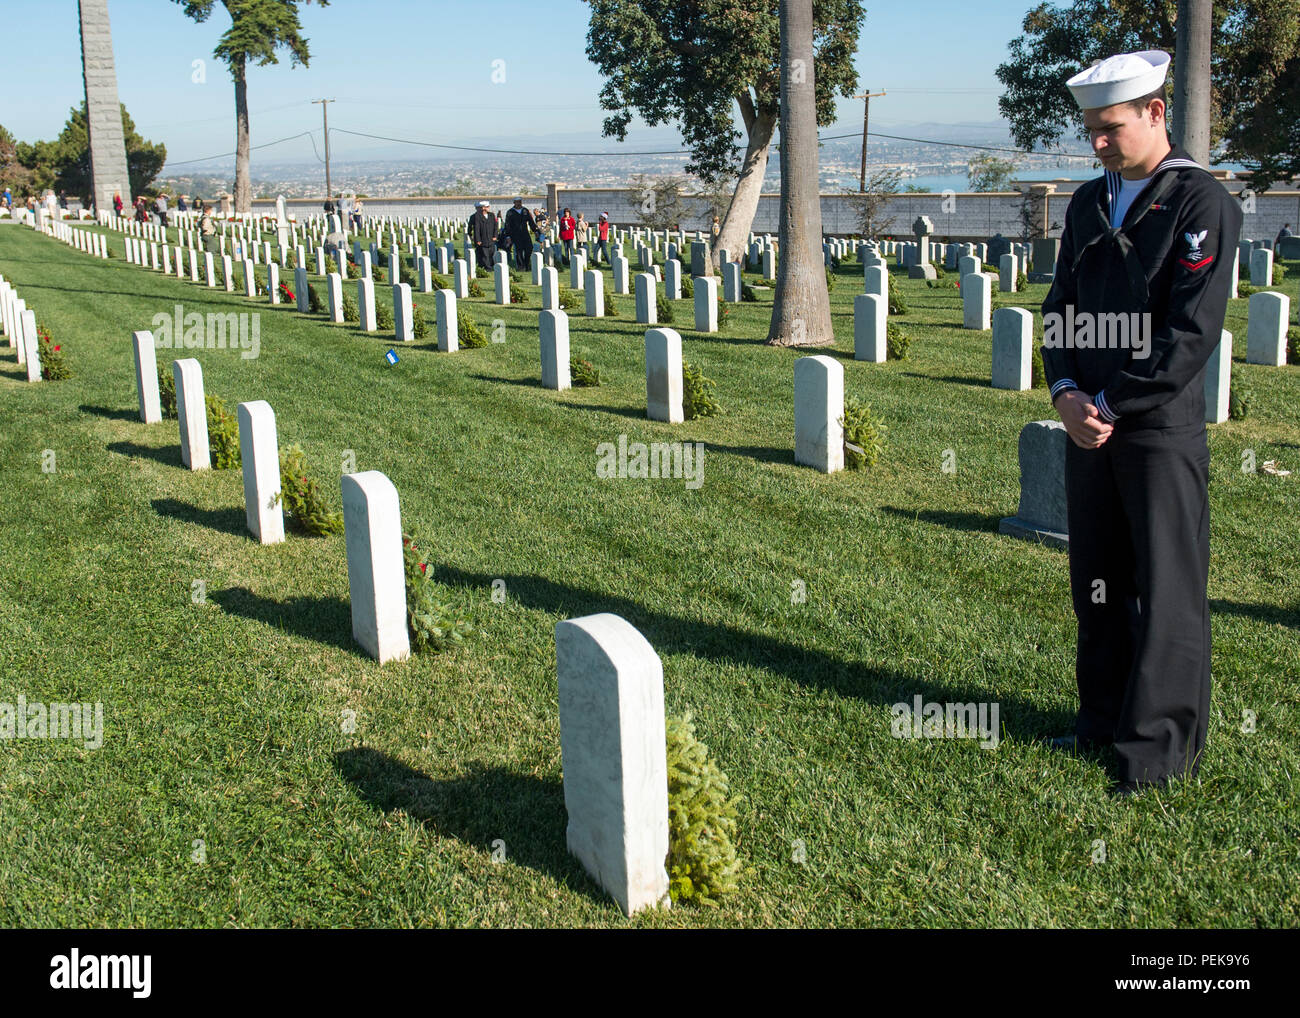 151212-N-QW941-205  SAN DIEGO (Dec. 12, 2015) Information Systems Technician 3rd Class Devon Edmonds pays his respects to fallen military members during the Wreaths Across America ceremony at Fort Rosecran’s National Cemetery. Wreaths Across America is an annual event that takes place in multiple locations where volunteers lay wreaths on tombstones of fallen military members. (U.S. Navy photo by Mass Communication Specialist 3rd Class Trevor Kohlrus/Released) Stock Photo